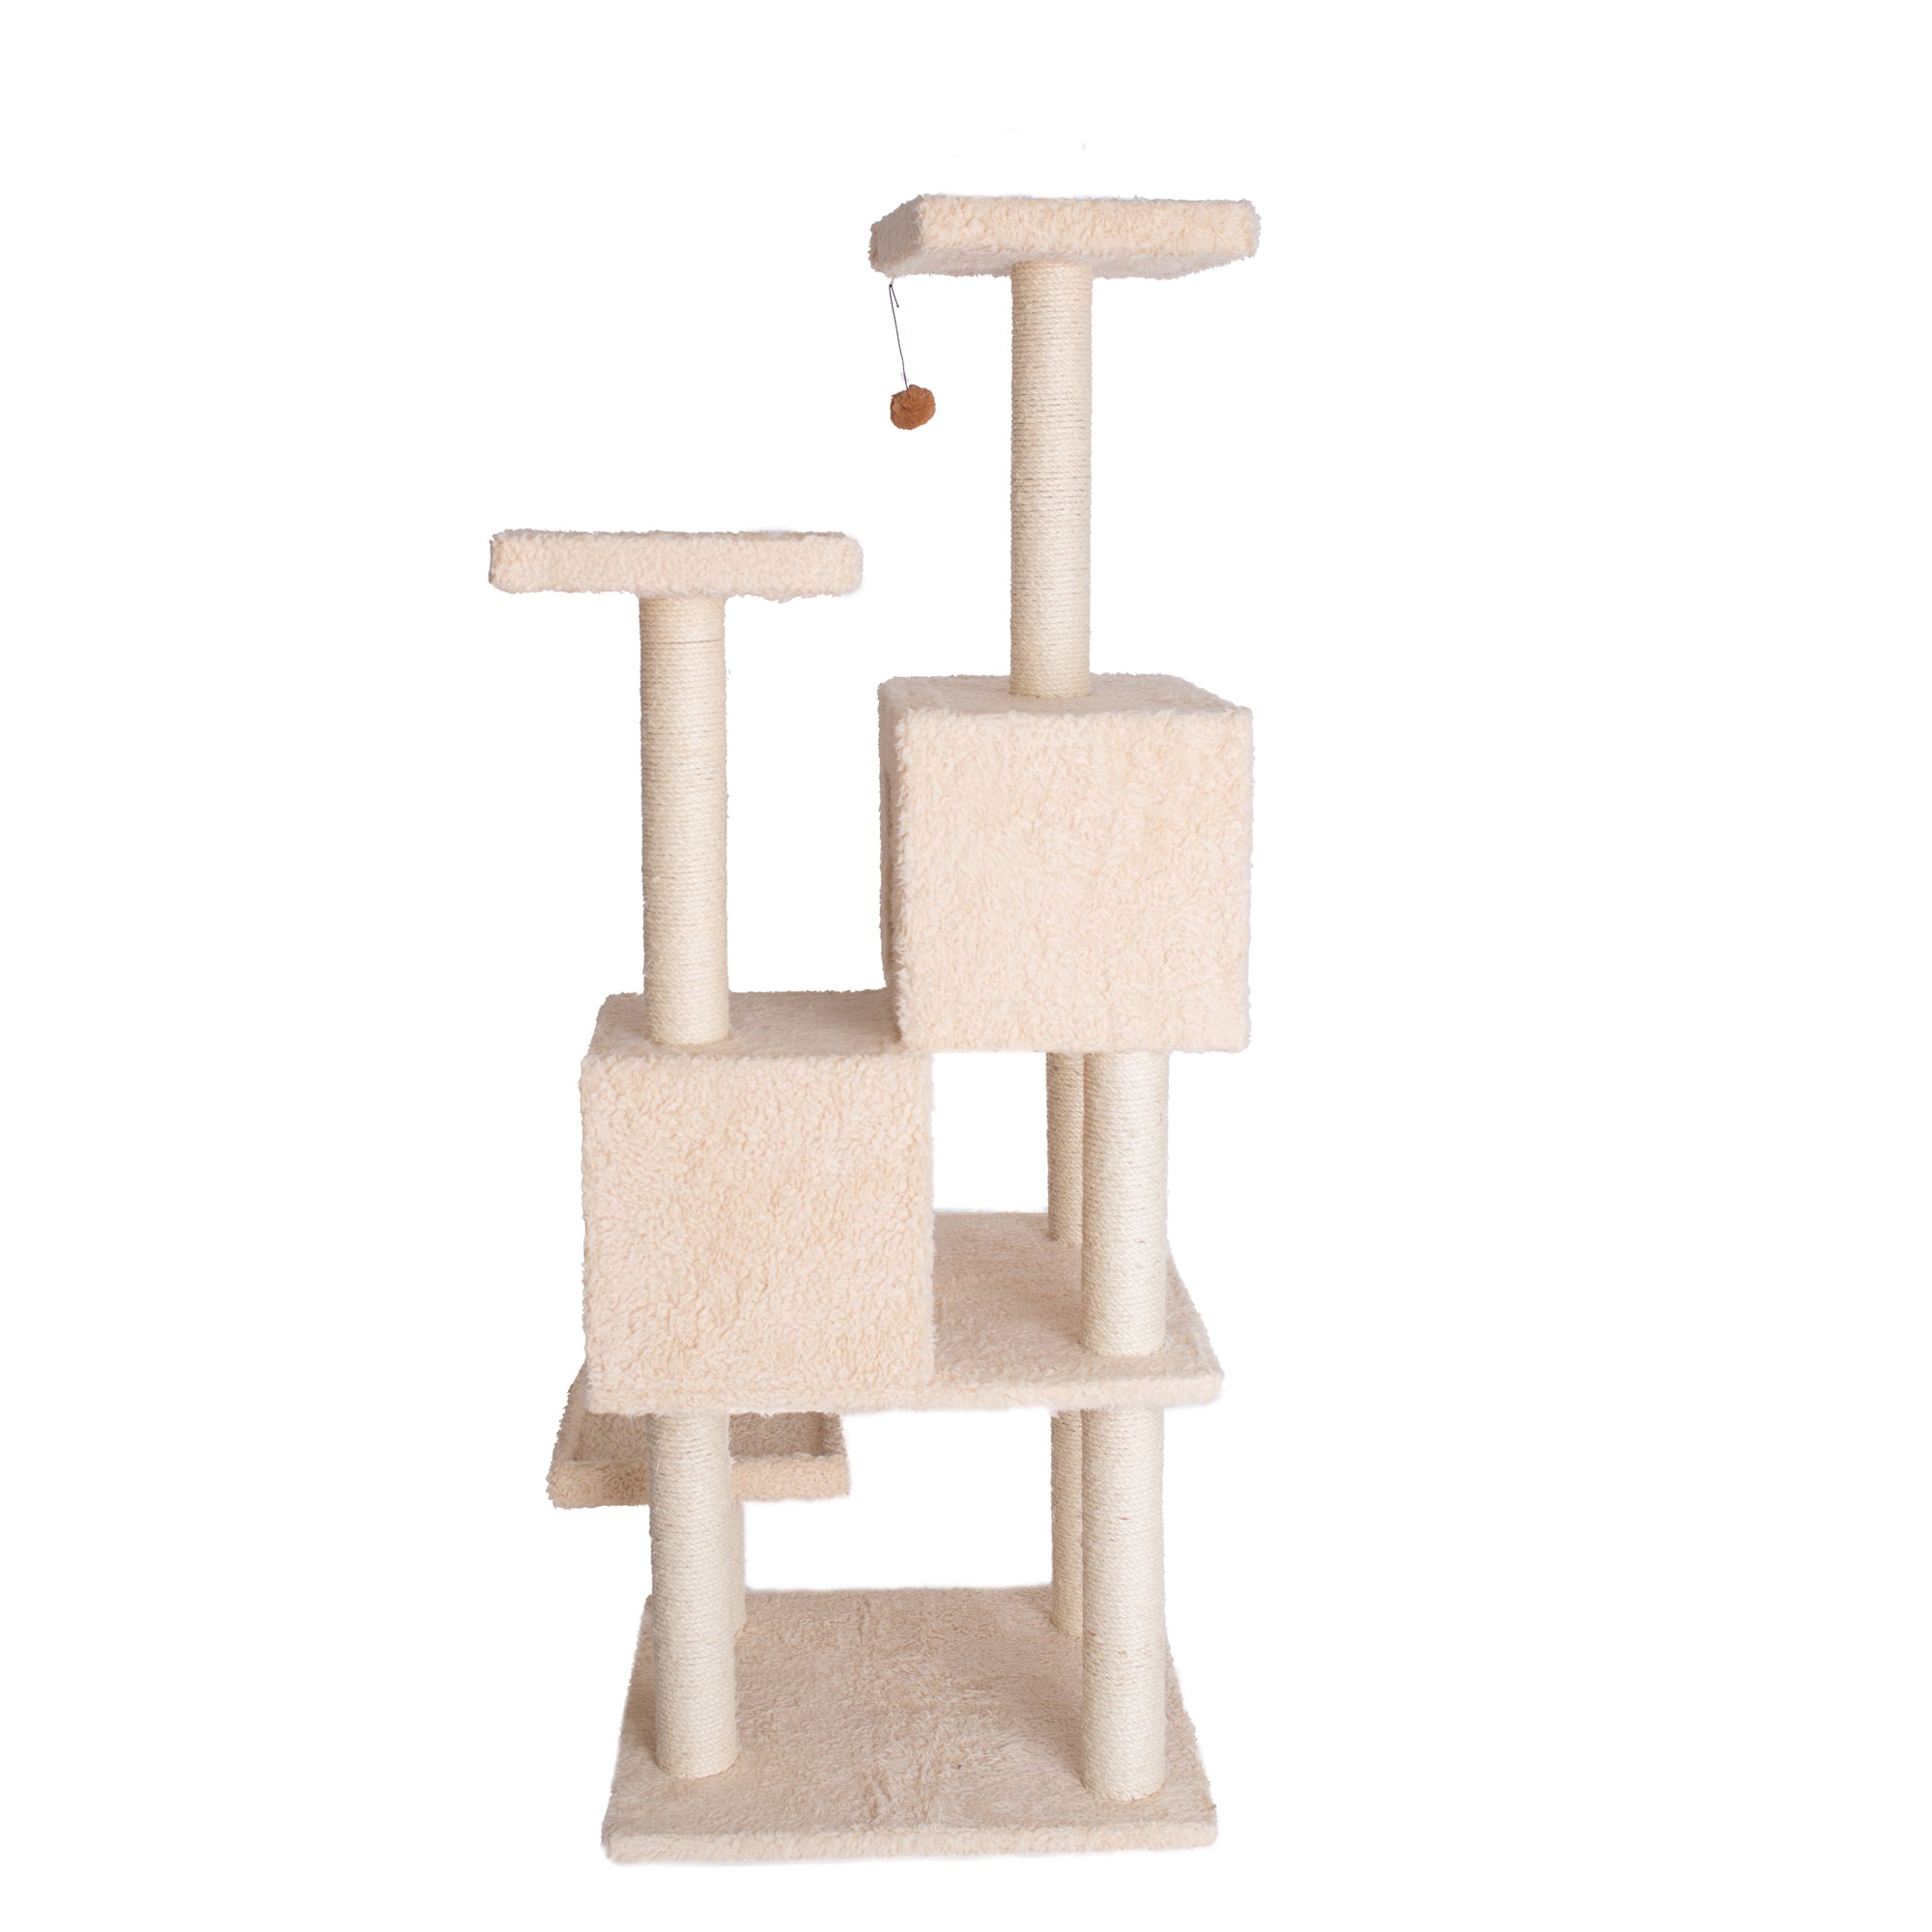 67-inch Ultra-Thick Faux Fur Cat Tree, Beige by Armarkat